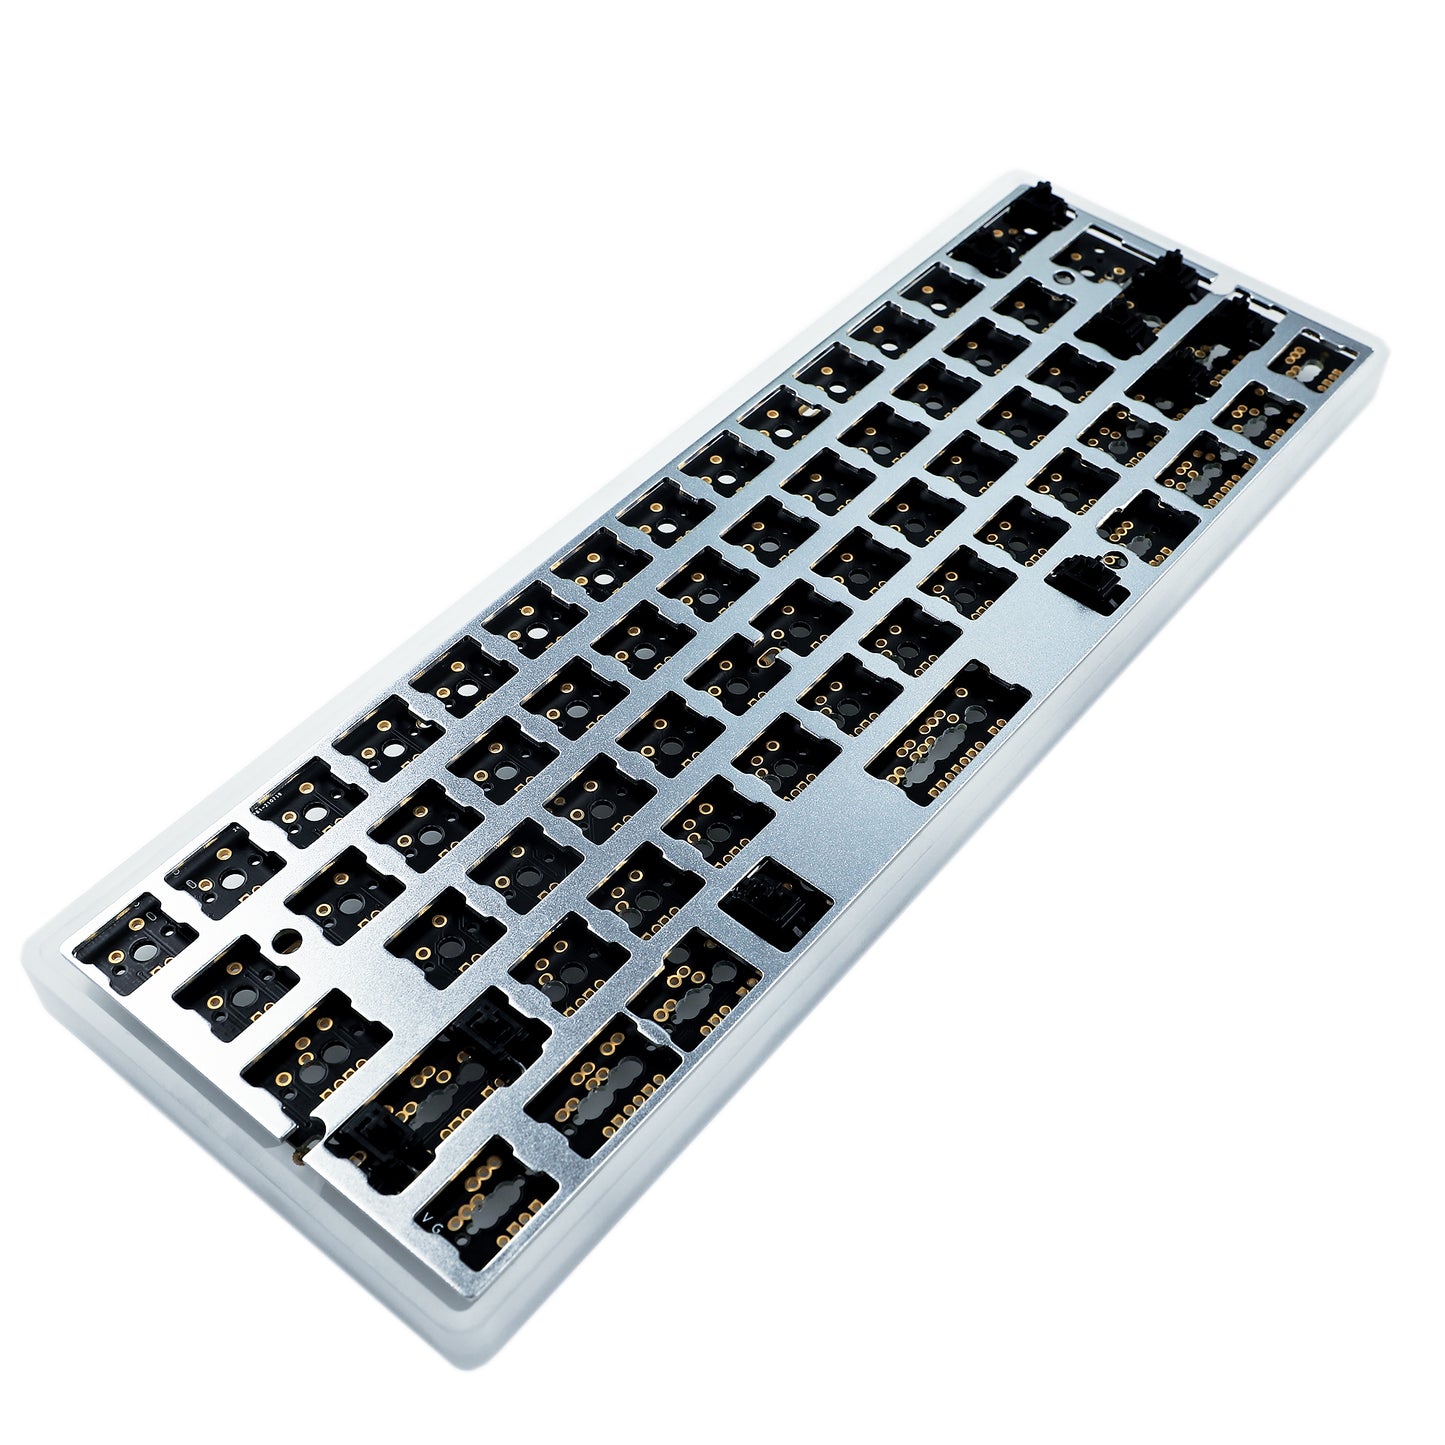 YMD-60% GH60 Acrylic Case Kit(QMK Soldering/ANSI ISO Multi-Layout Supported)